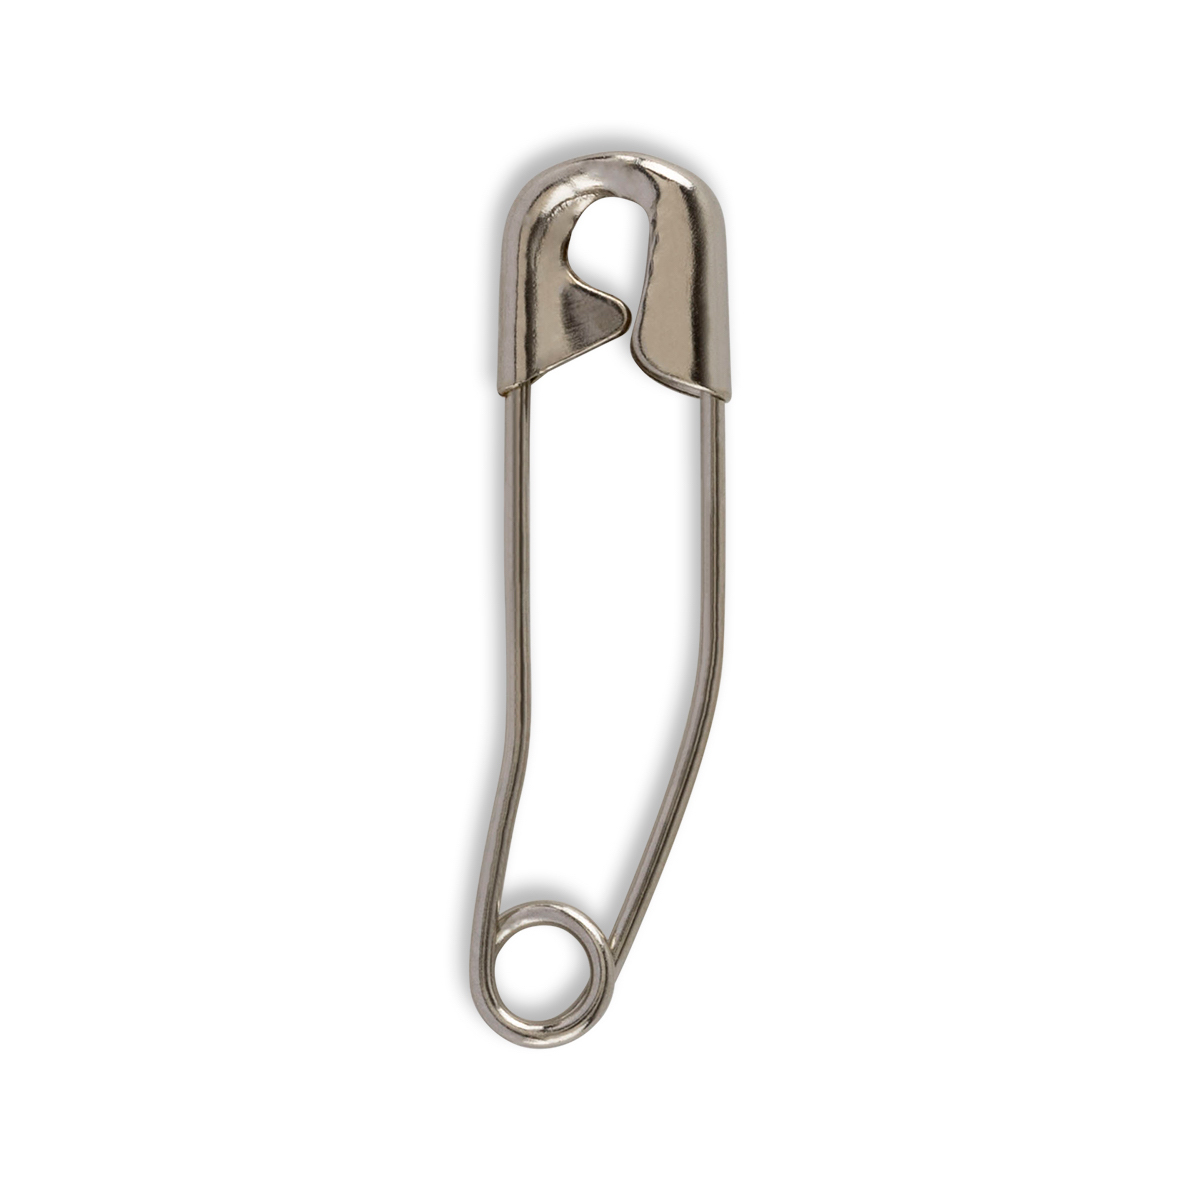 Dritz Quilters Curved Safety Pins | WAWAK